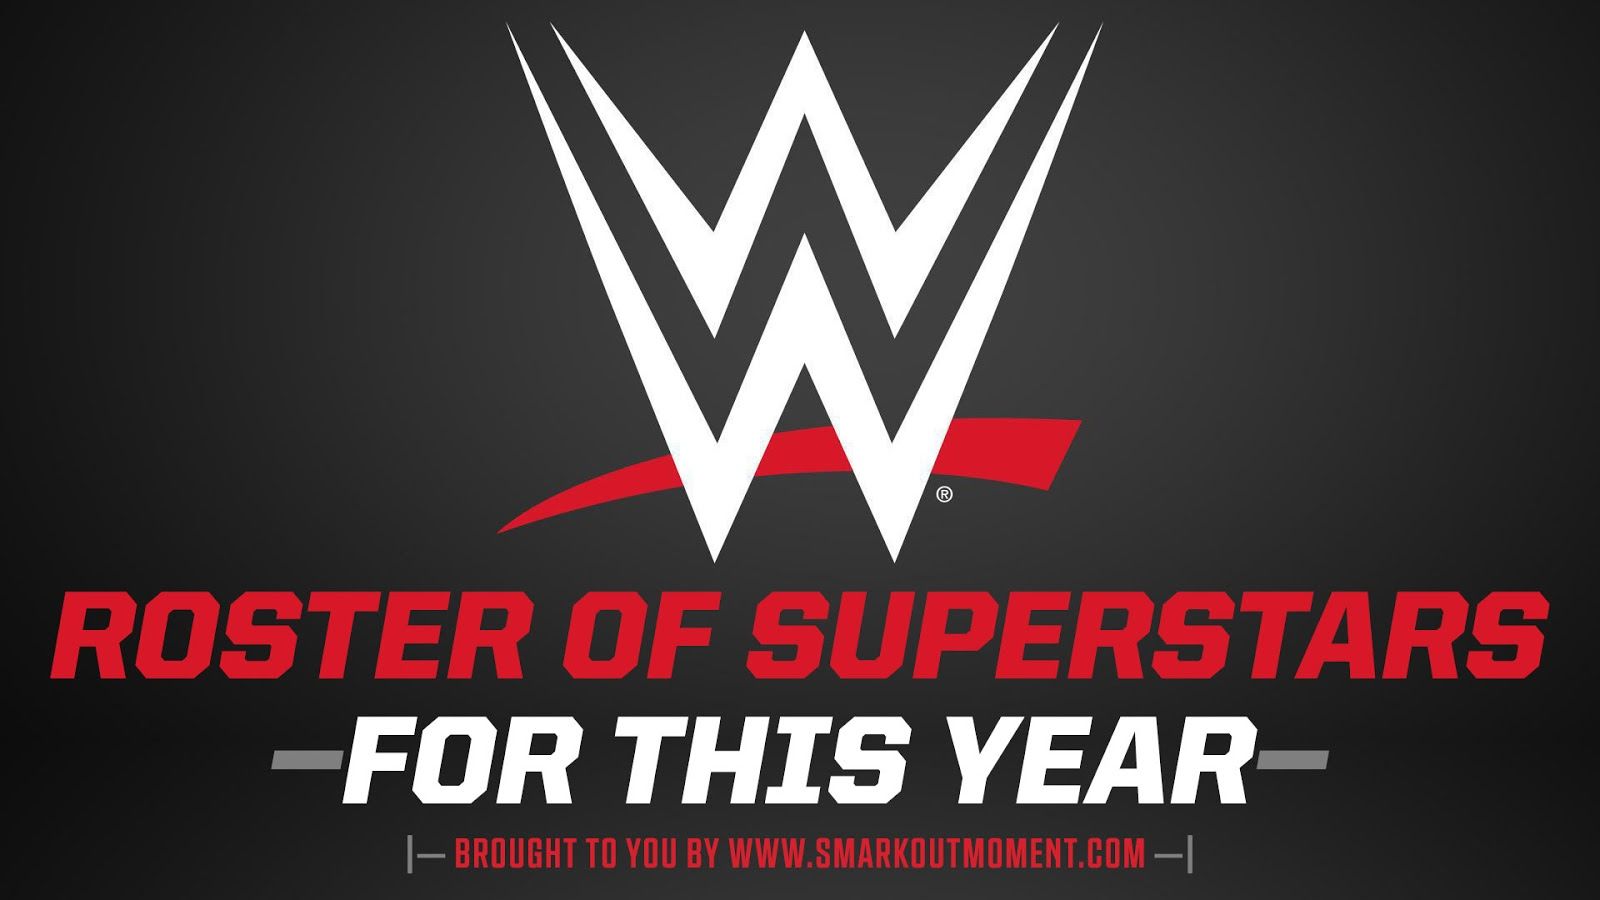 WWE Roster 2021 Superstars List for Raw, SmackDown, NXT & More. Smark Out Moment